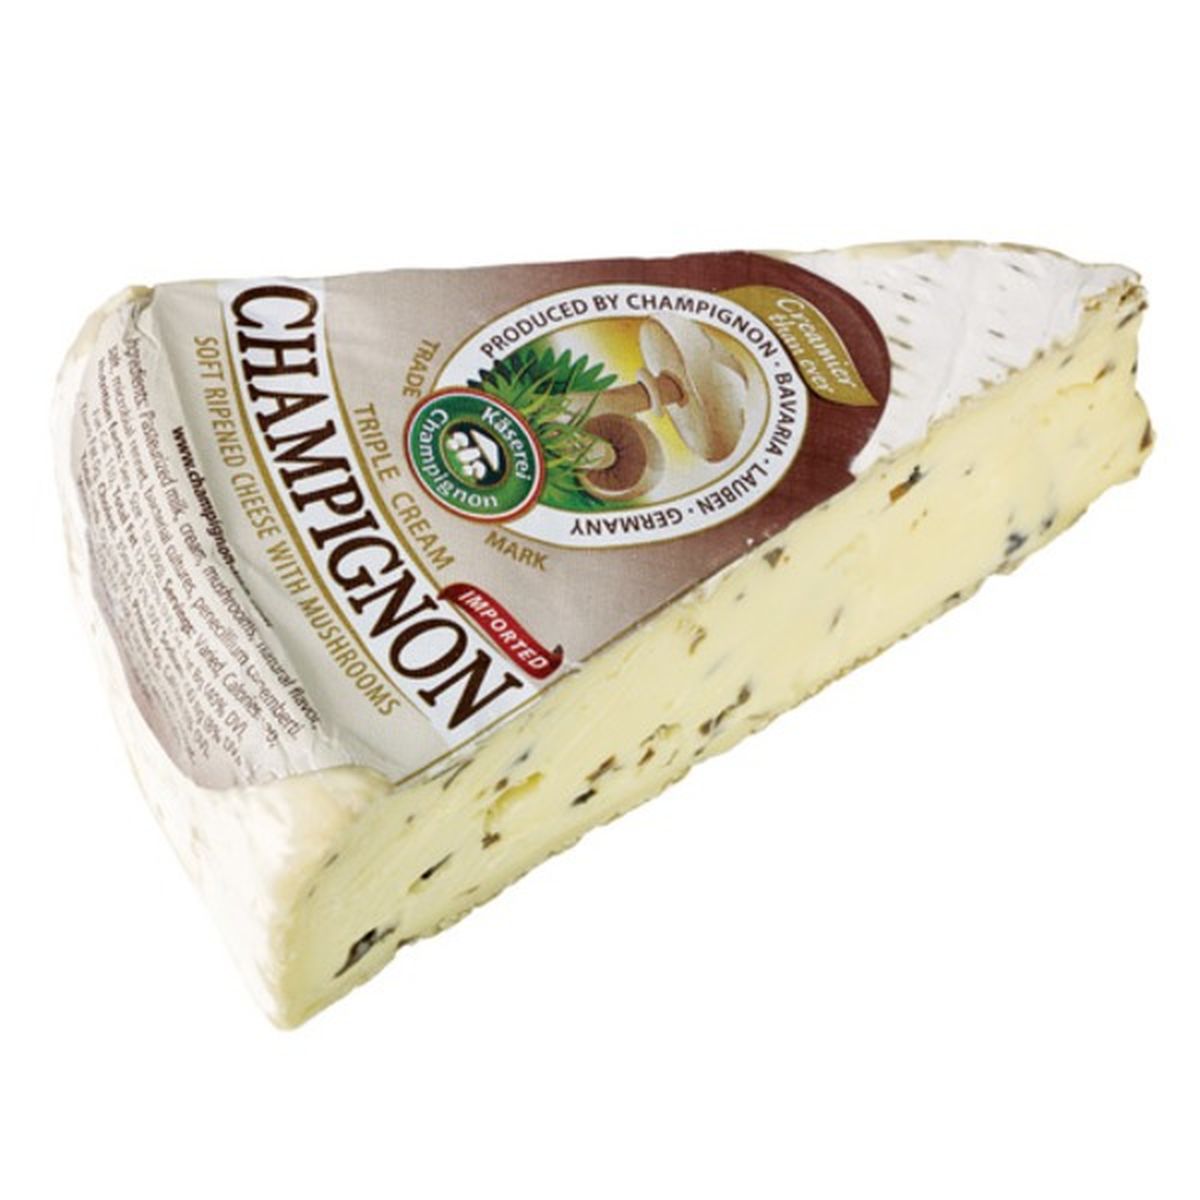 Calories in Champignon Triple CrÃ¨me Cheese with Mushrooms